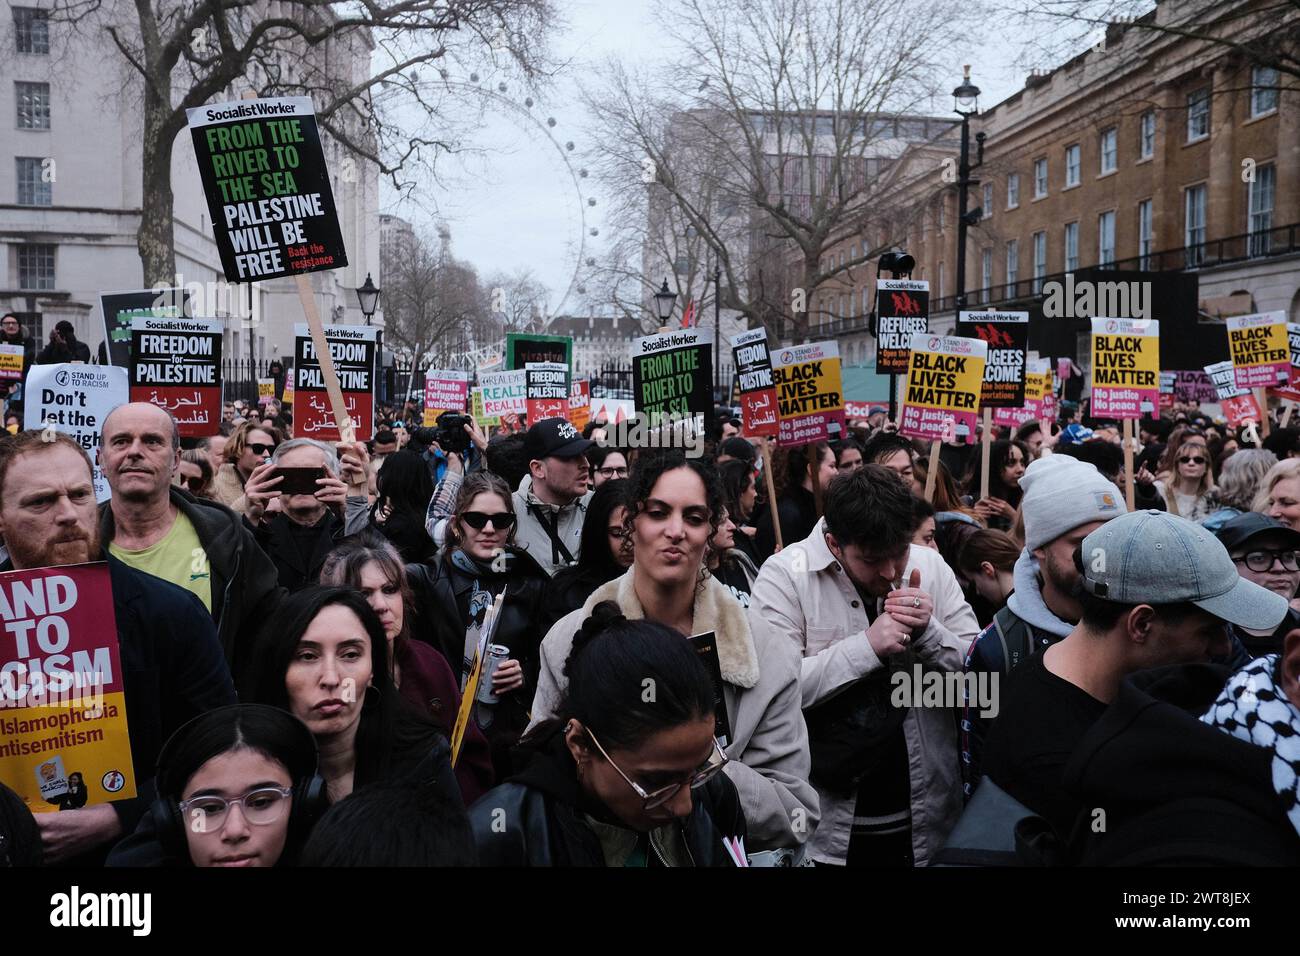 London, UK. 16th Mar, 2024. Some of the biggest DJs in Britain headline House Against Hate, a rave outside Downing Street, with Jeremy Corbyn and line-up of acts including The Blessed Madonna, Yazmin Lacey and Hot Chip. Credit: Joao Daniel Pereira/Alamy Live News Stock Photo